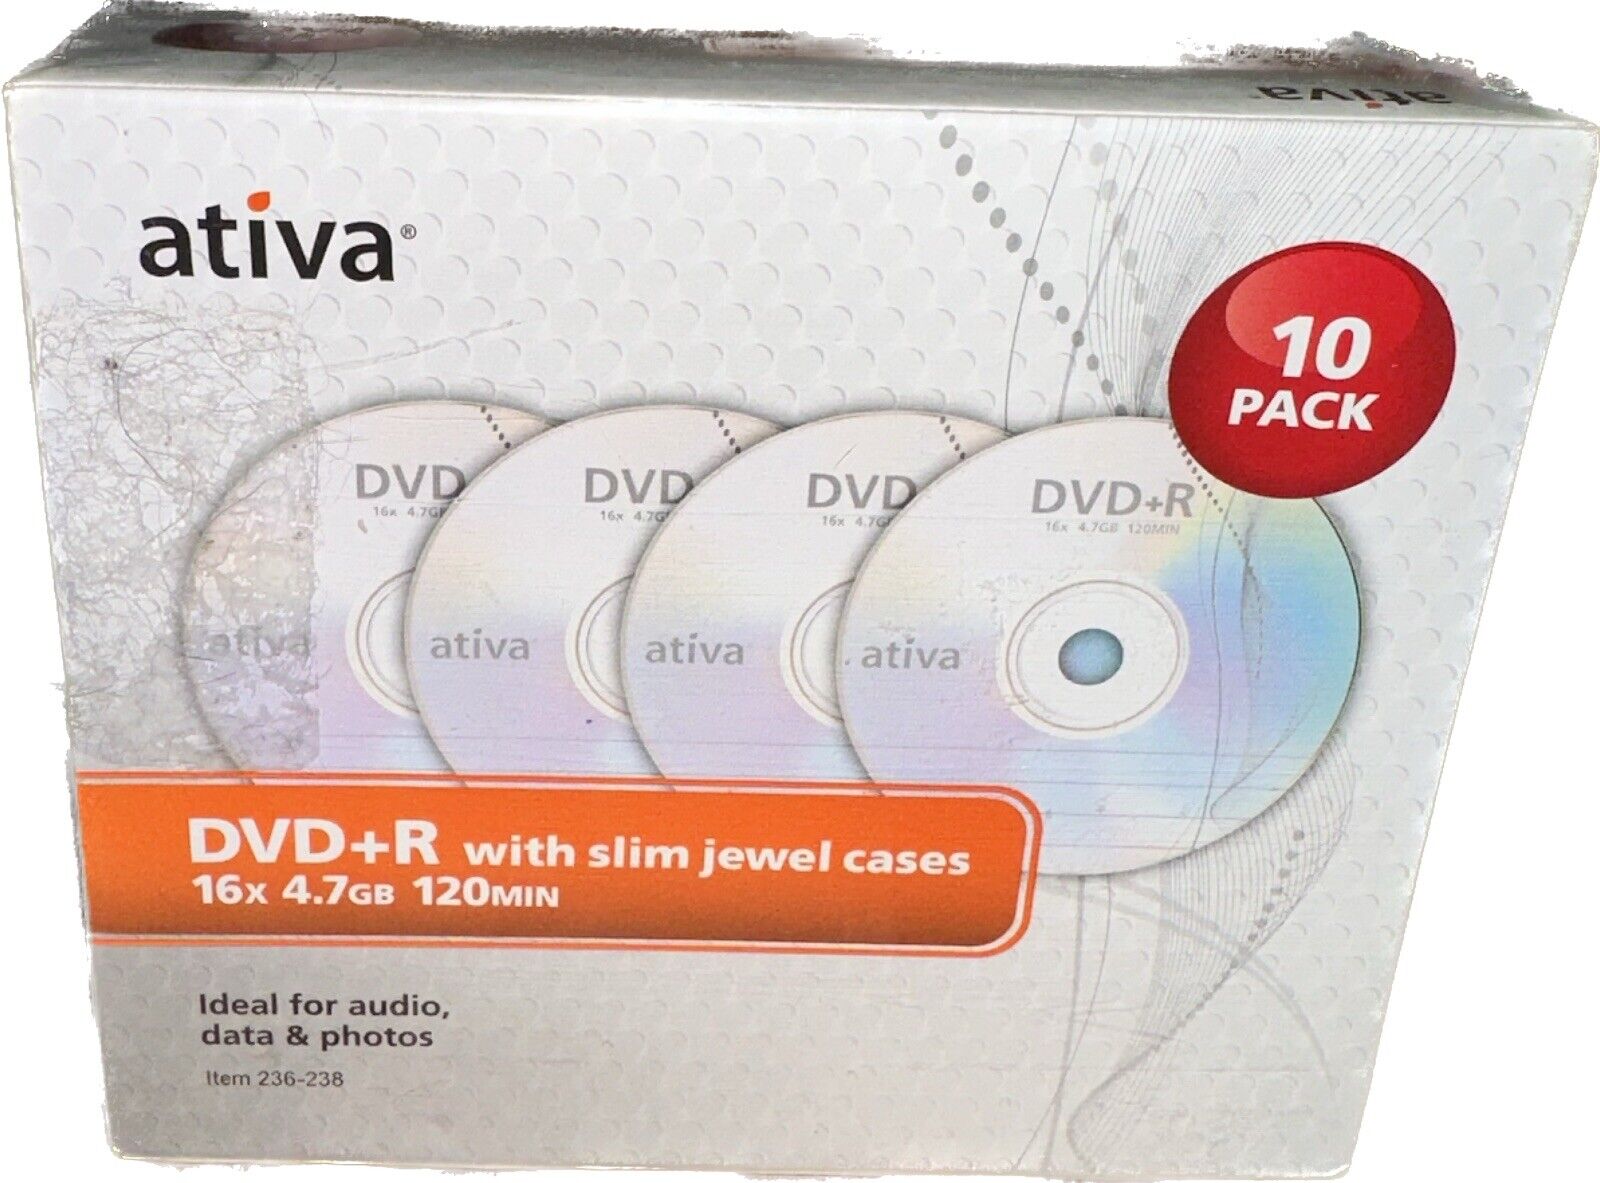 Ativa DVD+R Discs With Slim Jewel Cases16X 4.7GB 120 Min Factory Sealed 10 Pack